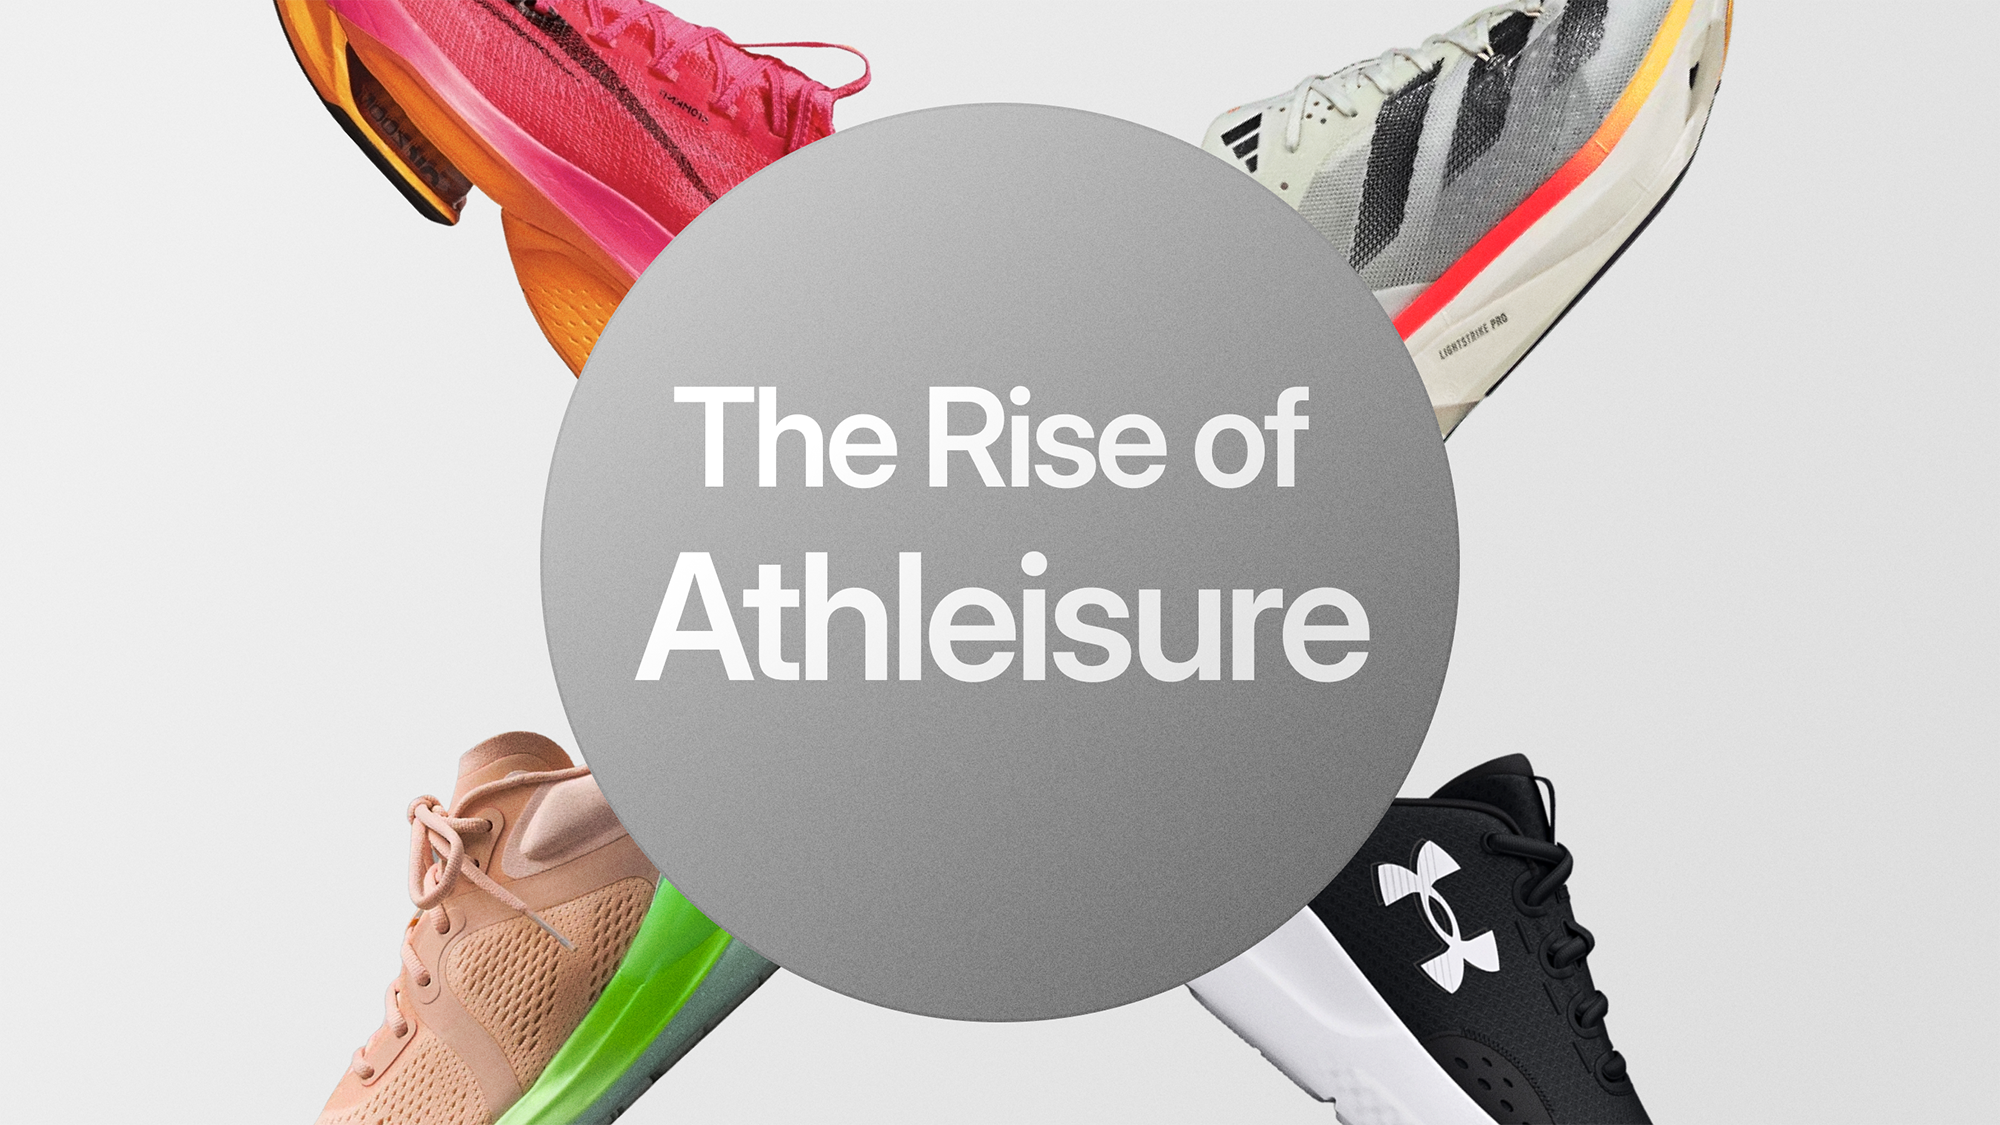 The Rise of Public Athleisure companies